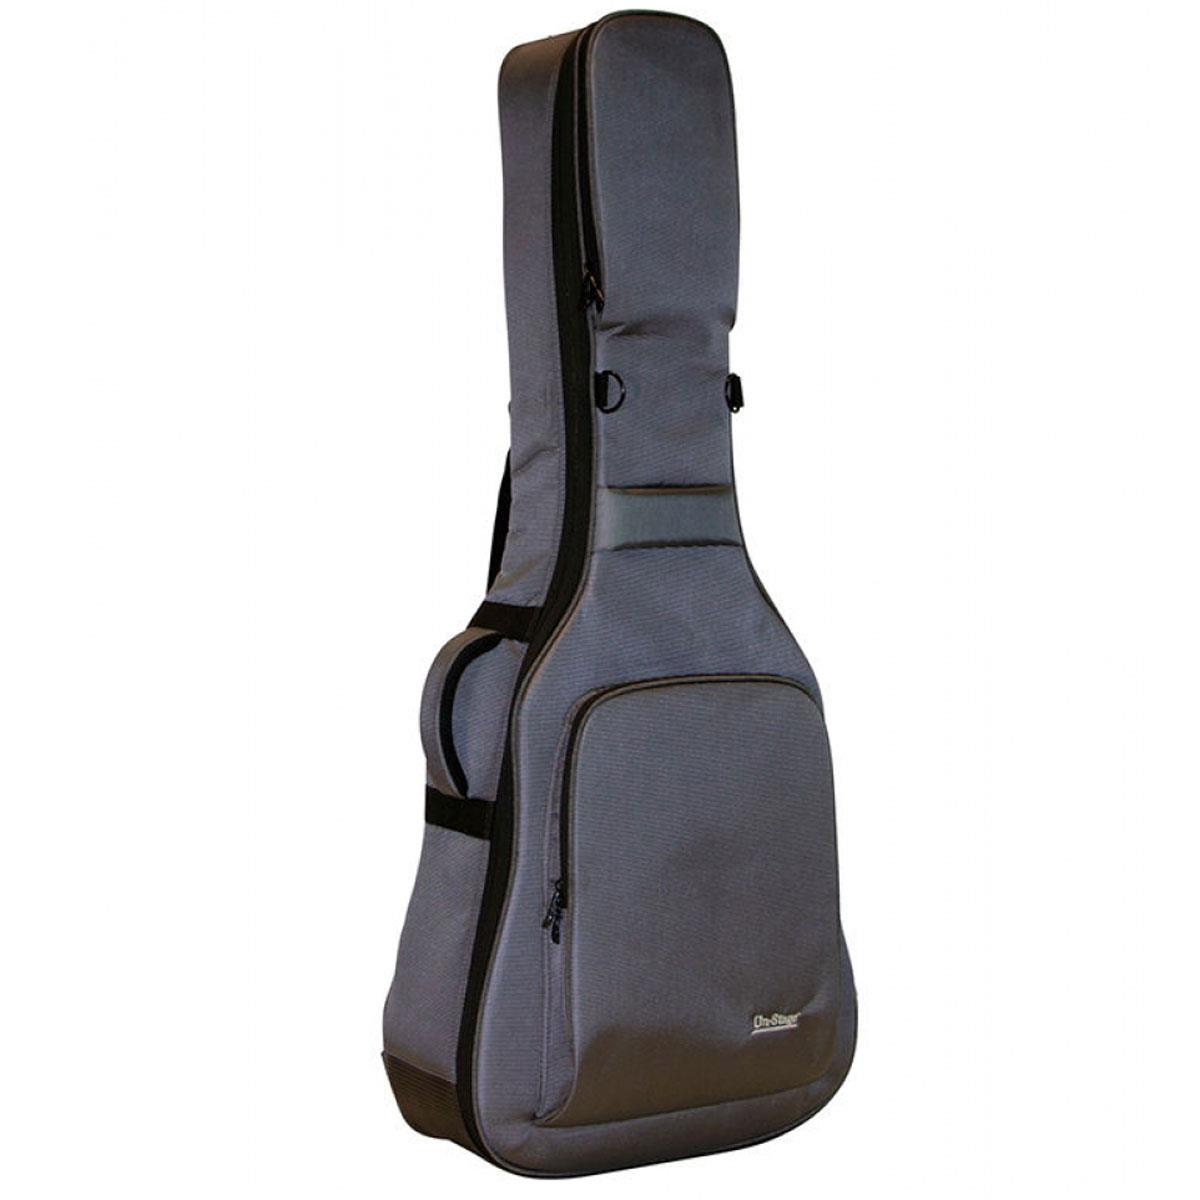 On-Stage GBA4990 Deluxe Acoustic Guitar Gig Bag, Charcoal Gray -  14579